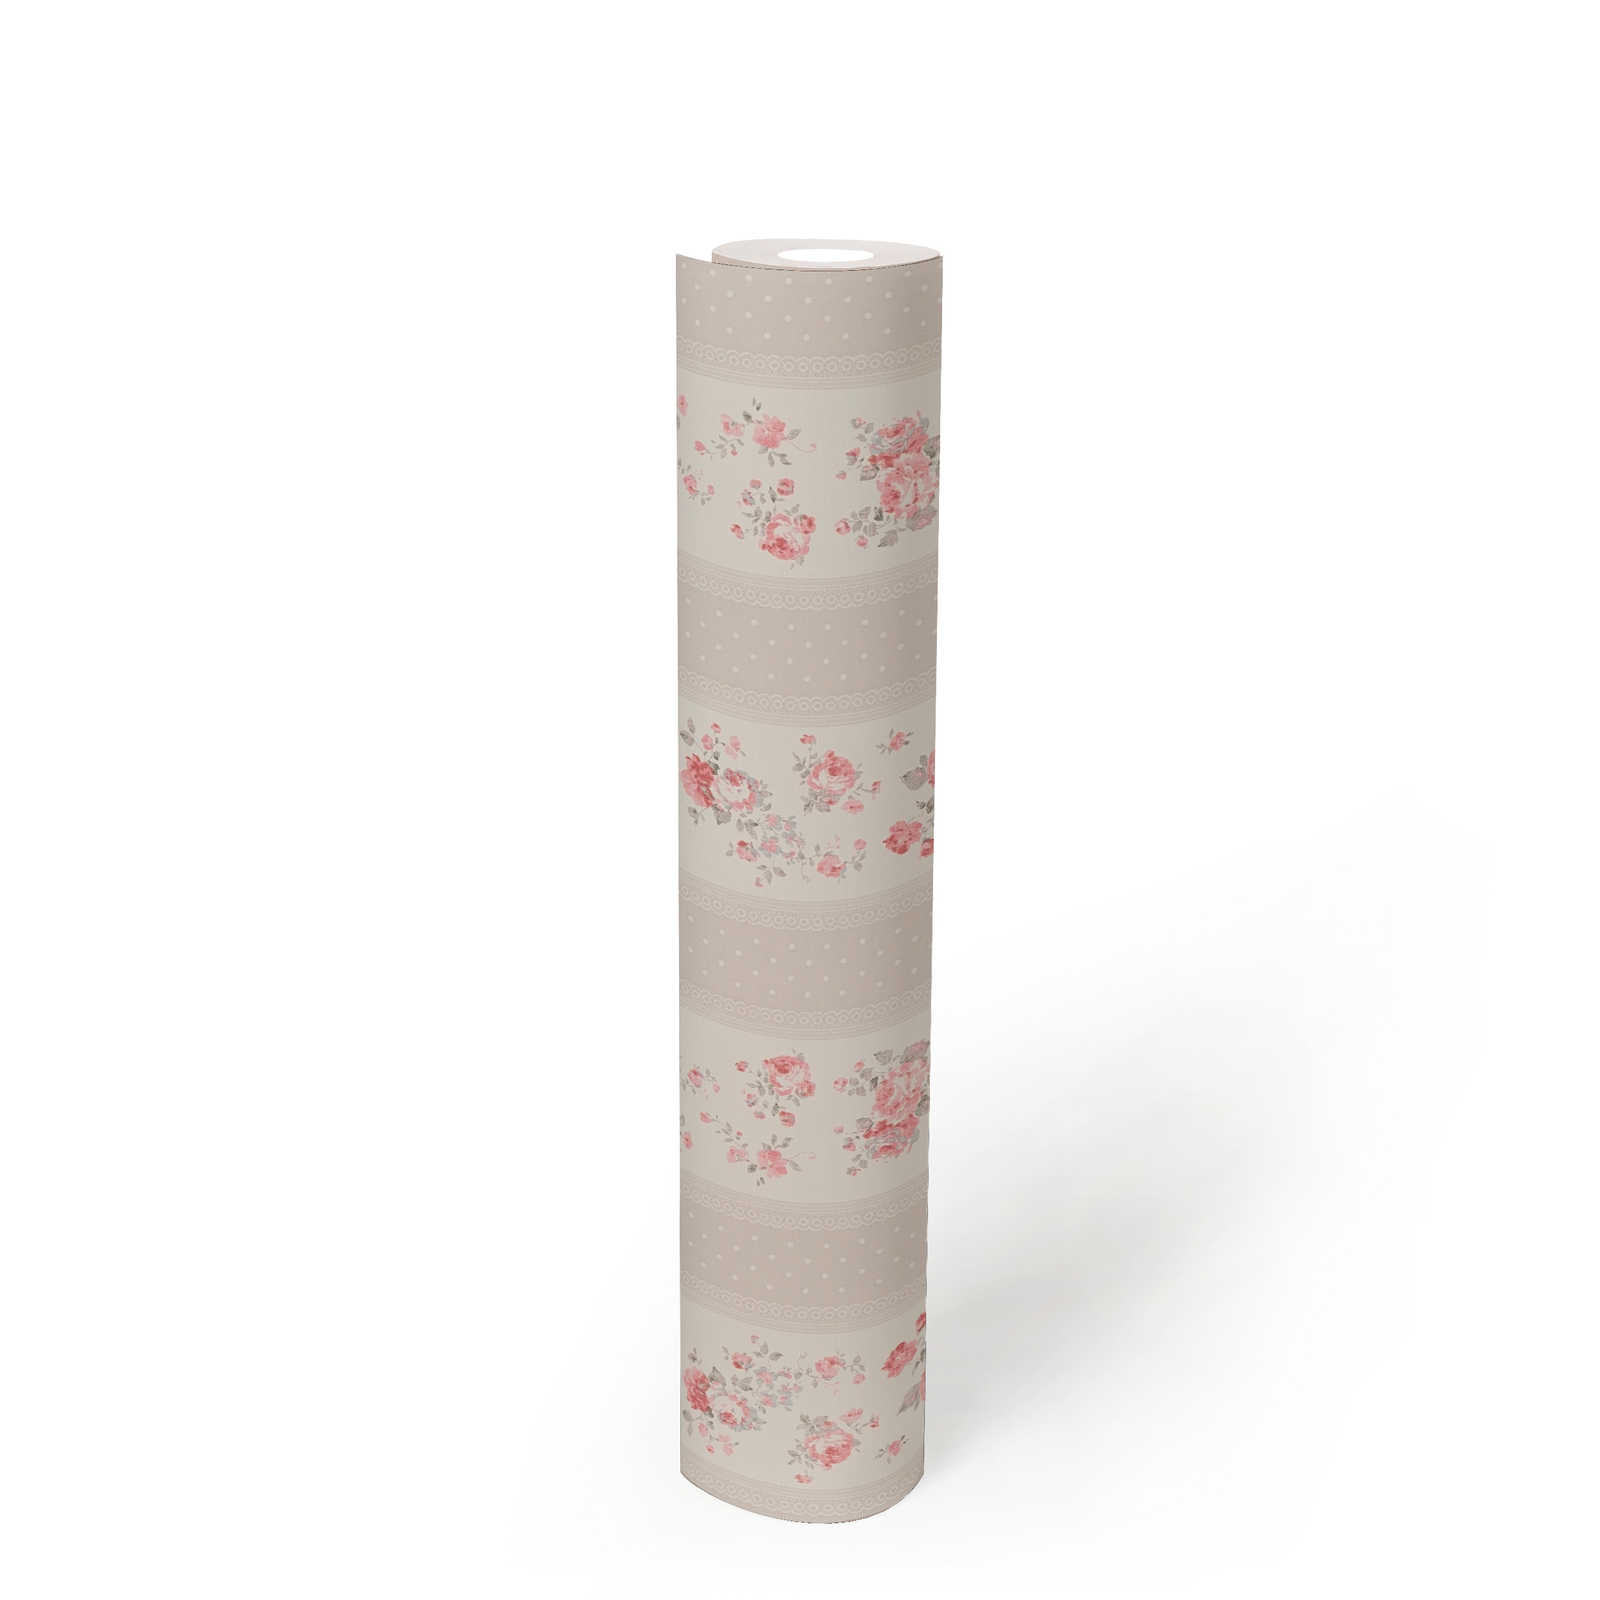             Shabby Chic style wallpaper with floral and dotted stripes - greige, white, red
        